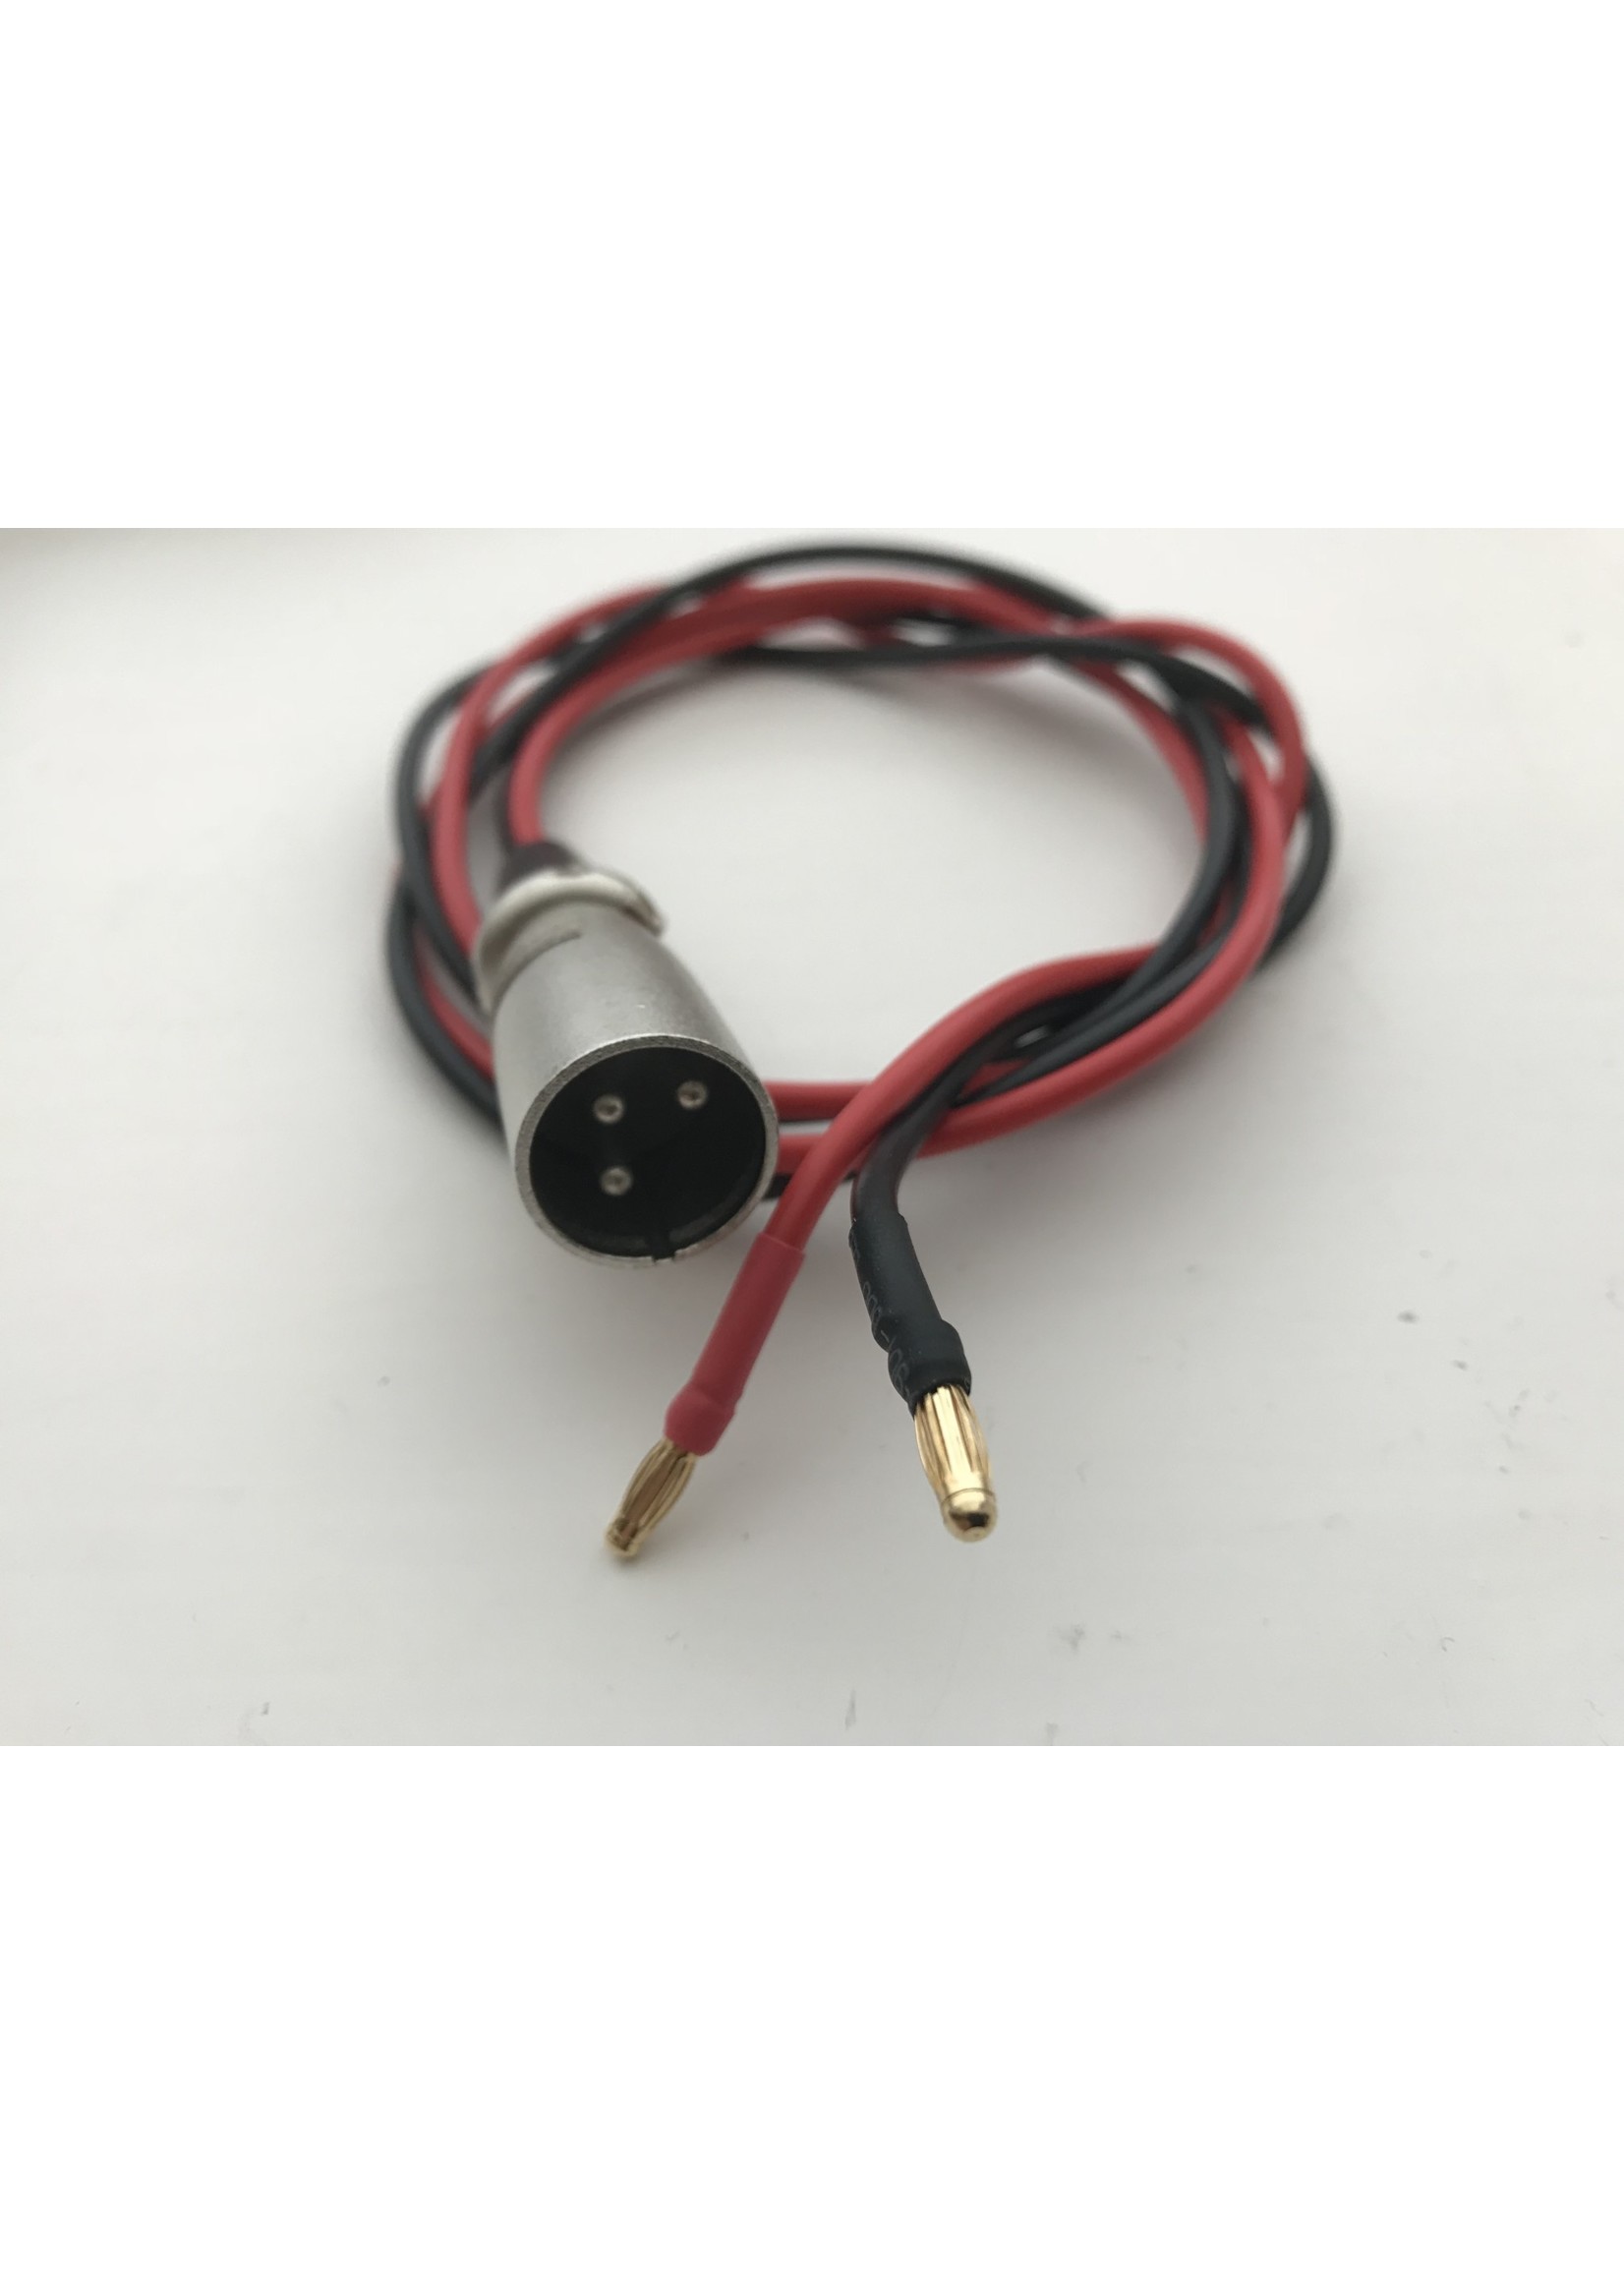 Batterytester Universal Test Cable 3 mm round contact points